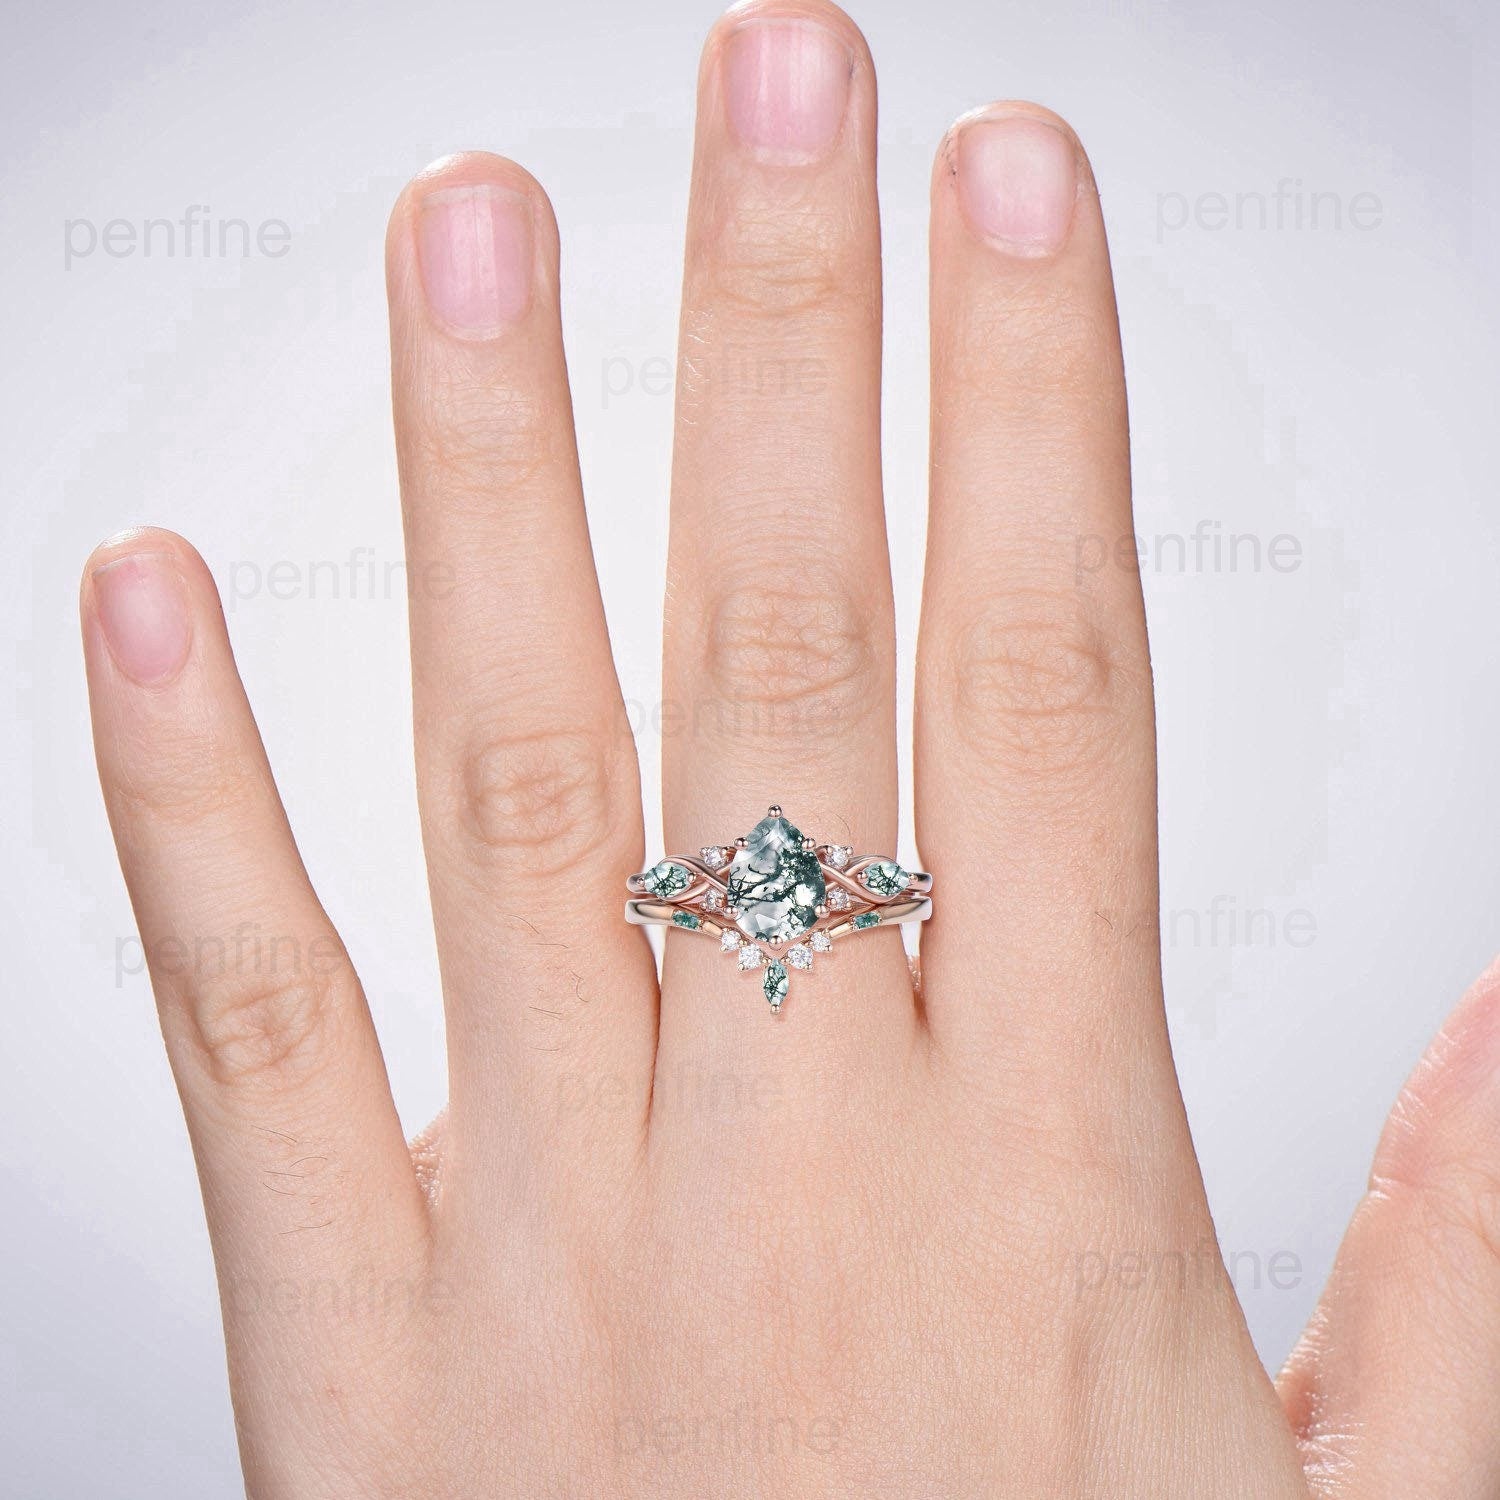 Vintage Pear Shaped Natural Green Moss Agate Engagement Ring Set Unique 14k Rose Gold Vine Marquise Agate Wedding Ring Set Ring for Women - PENFINE